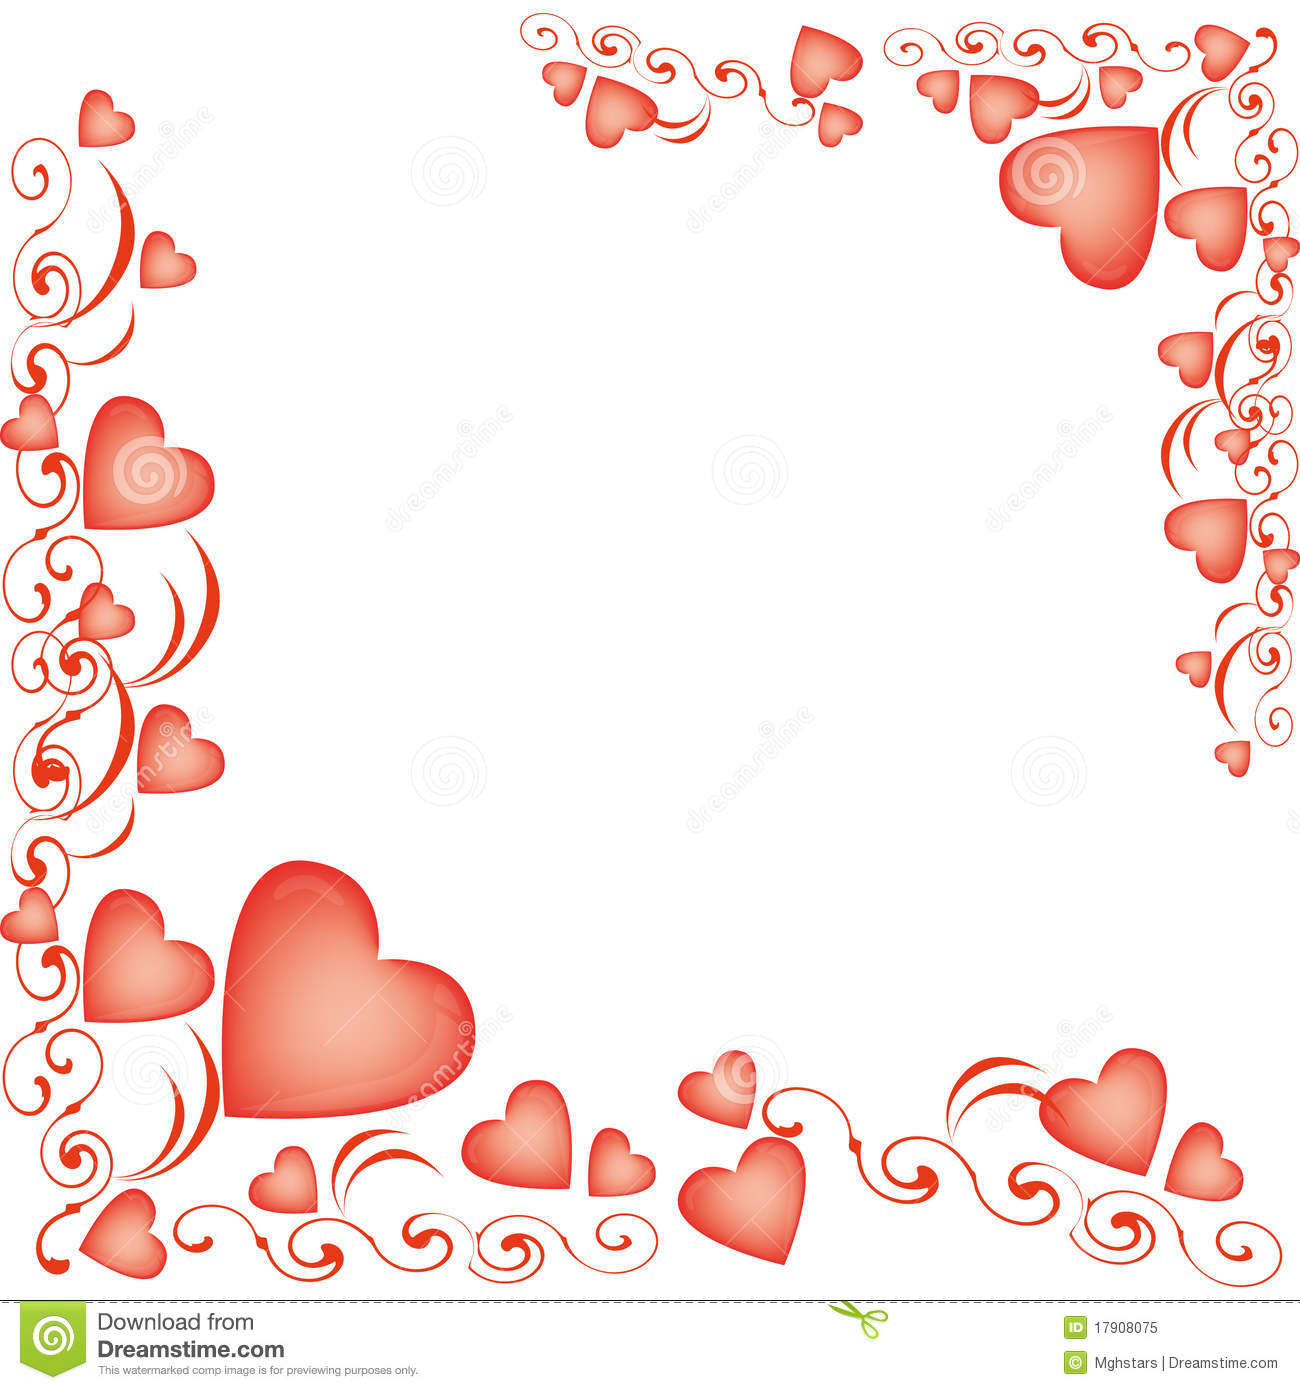 Heart Shaped Balloons For Valentine S Day Royalty Free Stock Photo